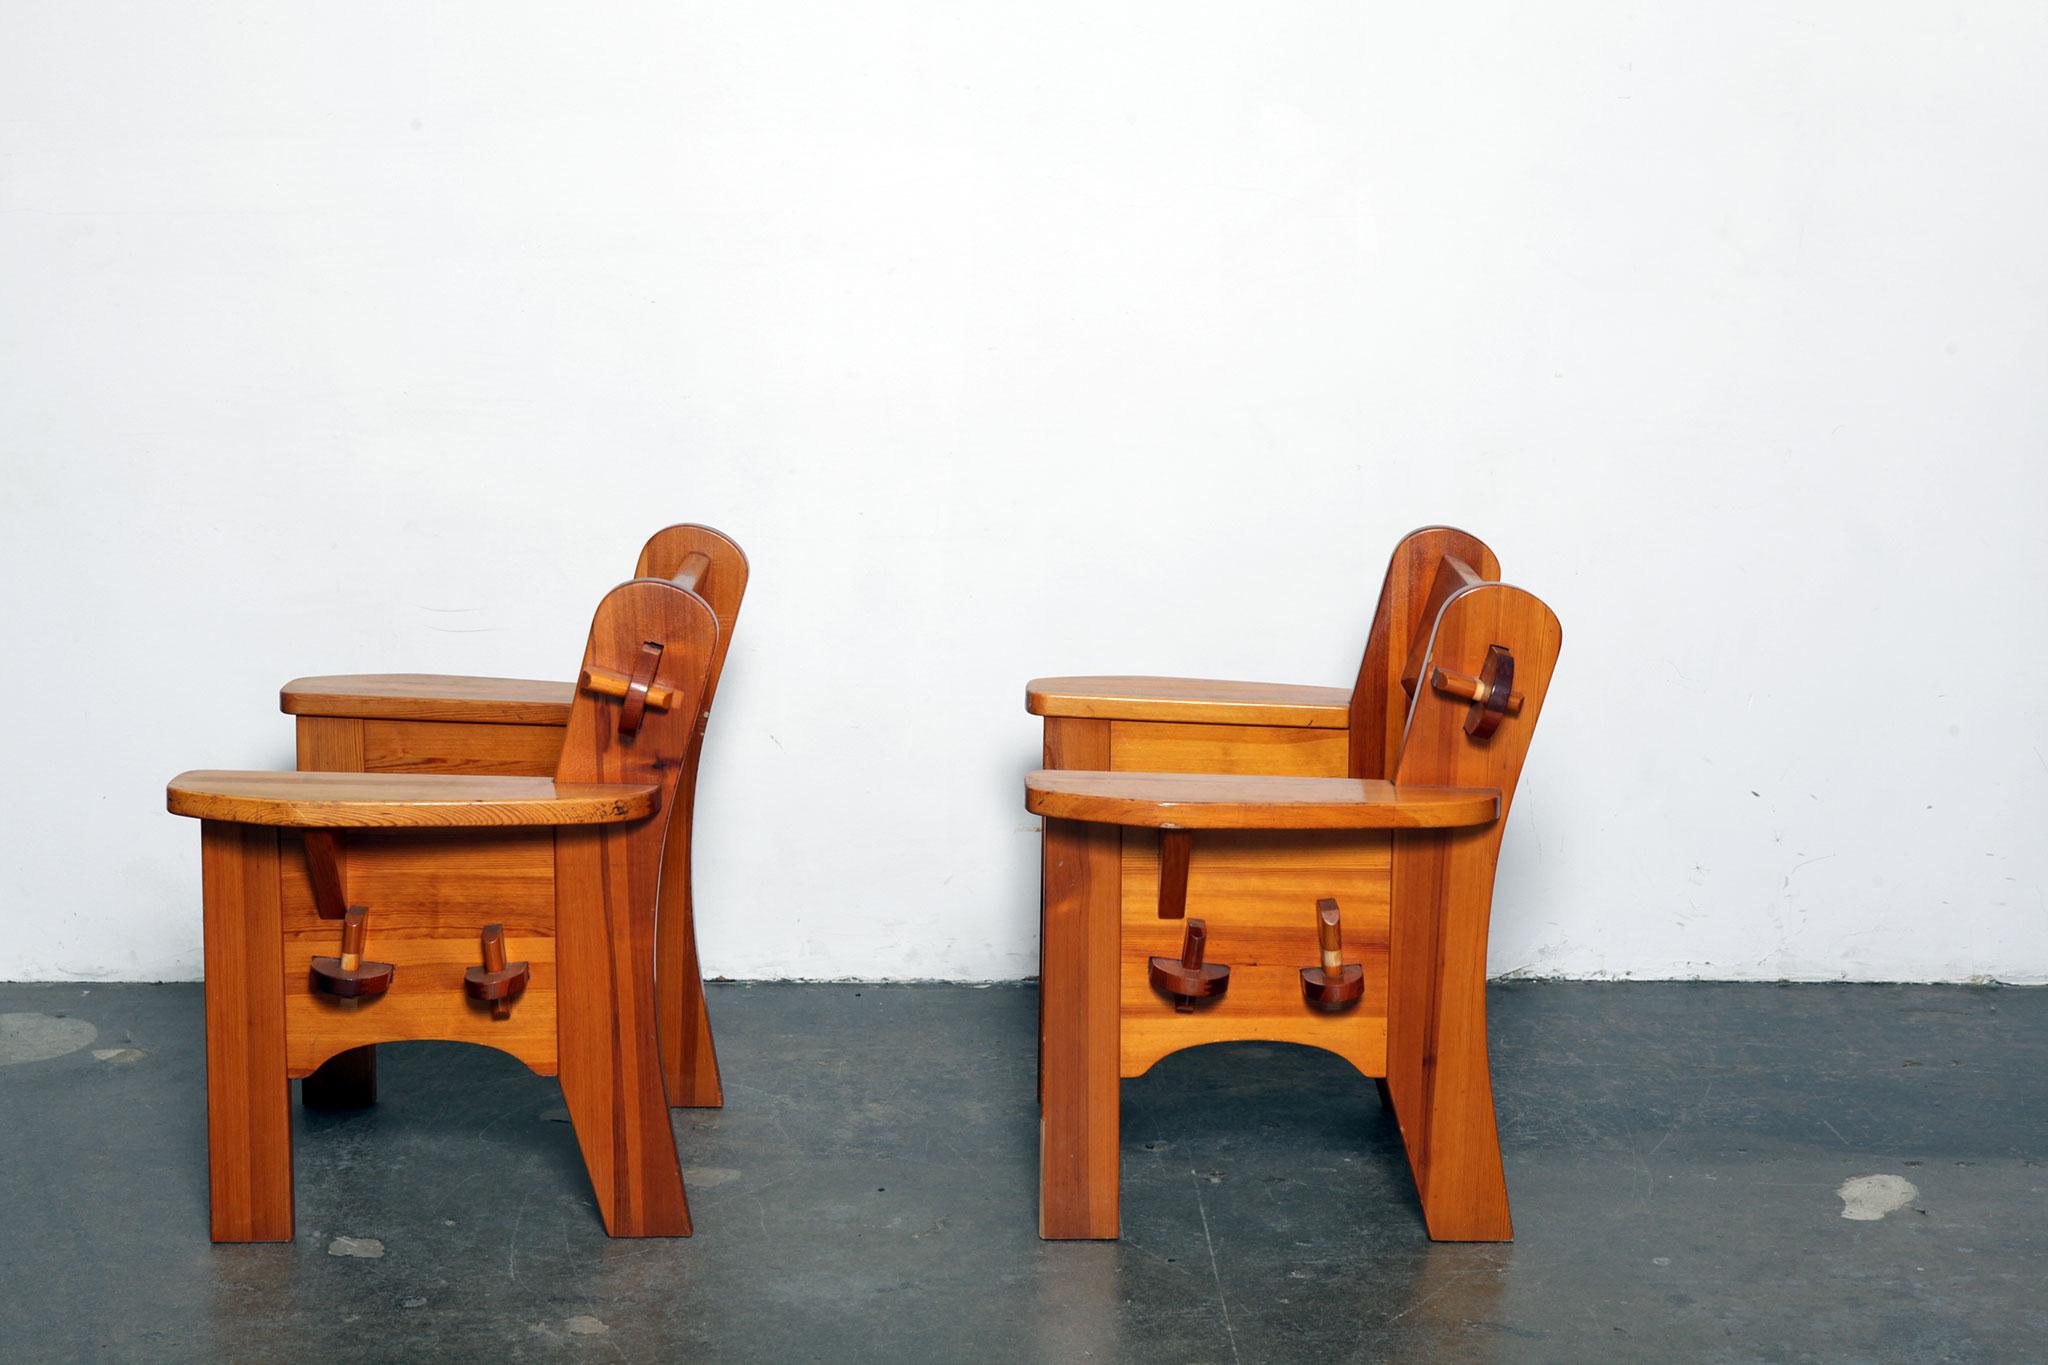 Mid-20th Century Pair of Solid Pine 'Berga' Chairs by David Rosen for Nordiska Kompaniet, Sweden For Sale